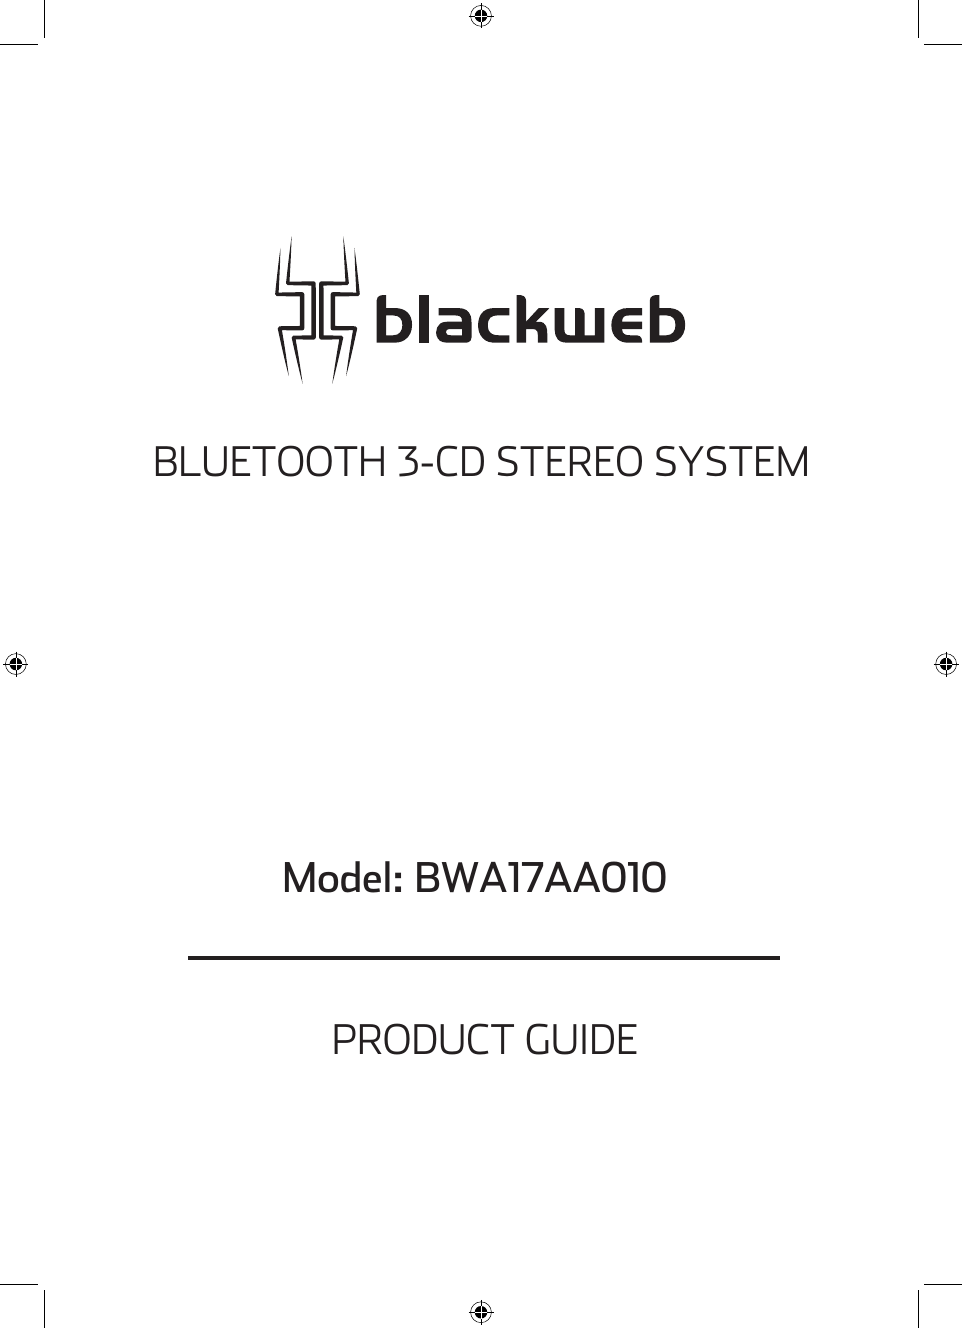 PRODUCT GUIDEModel: BWA17AA010BLUETOOTH 3-CD STEREO SYSTEM